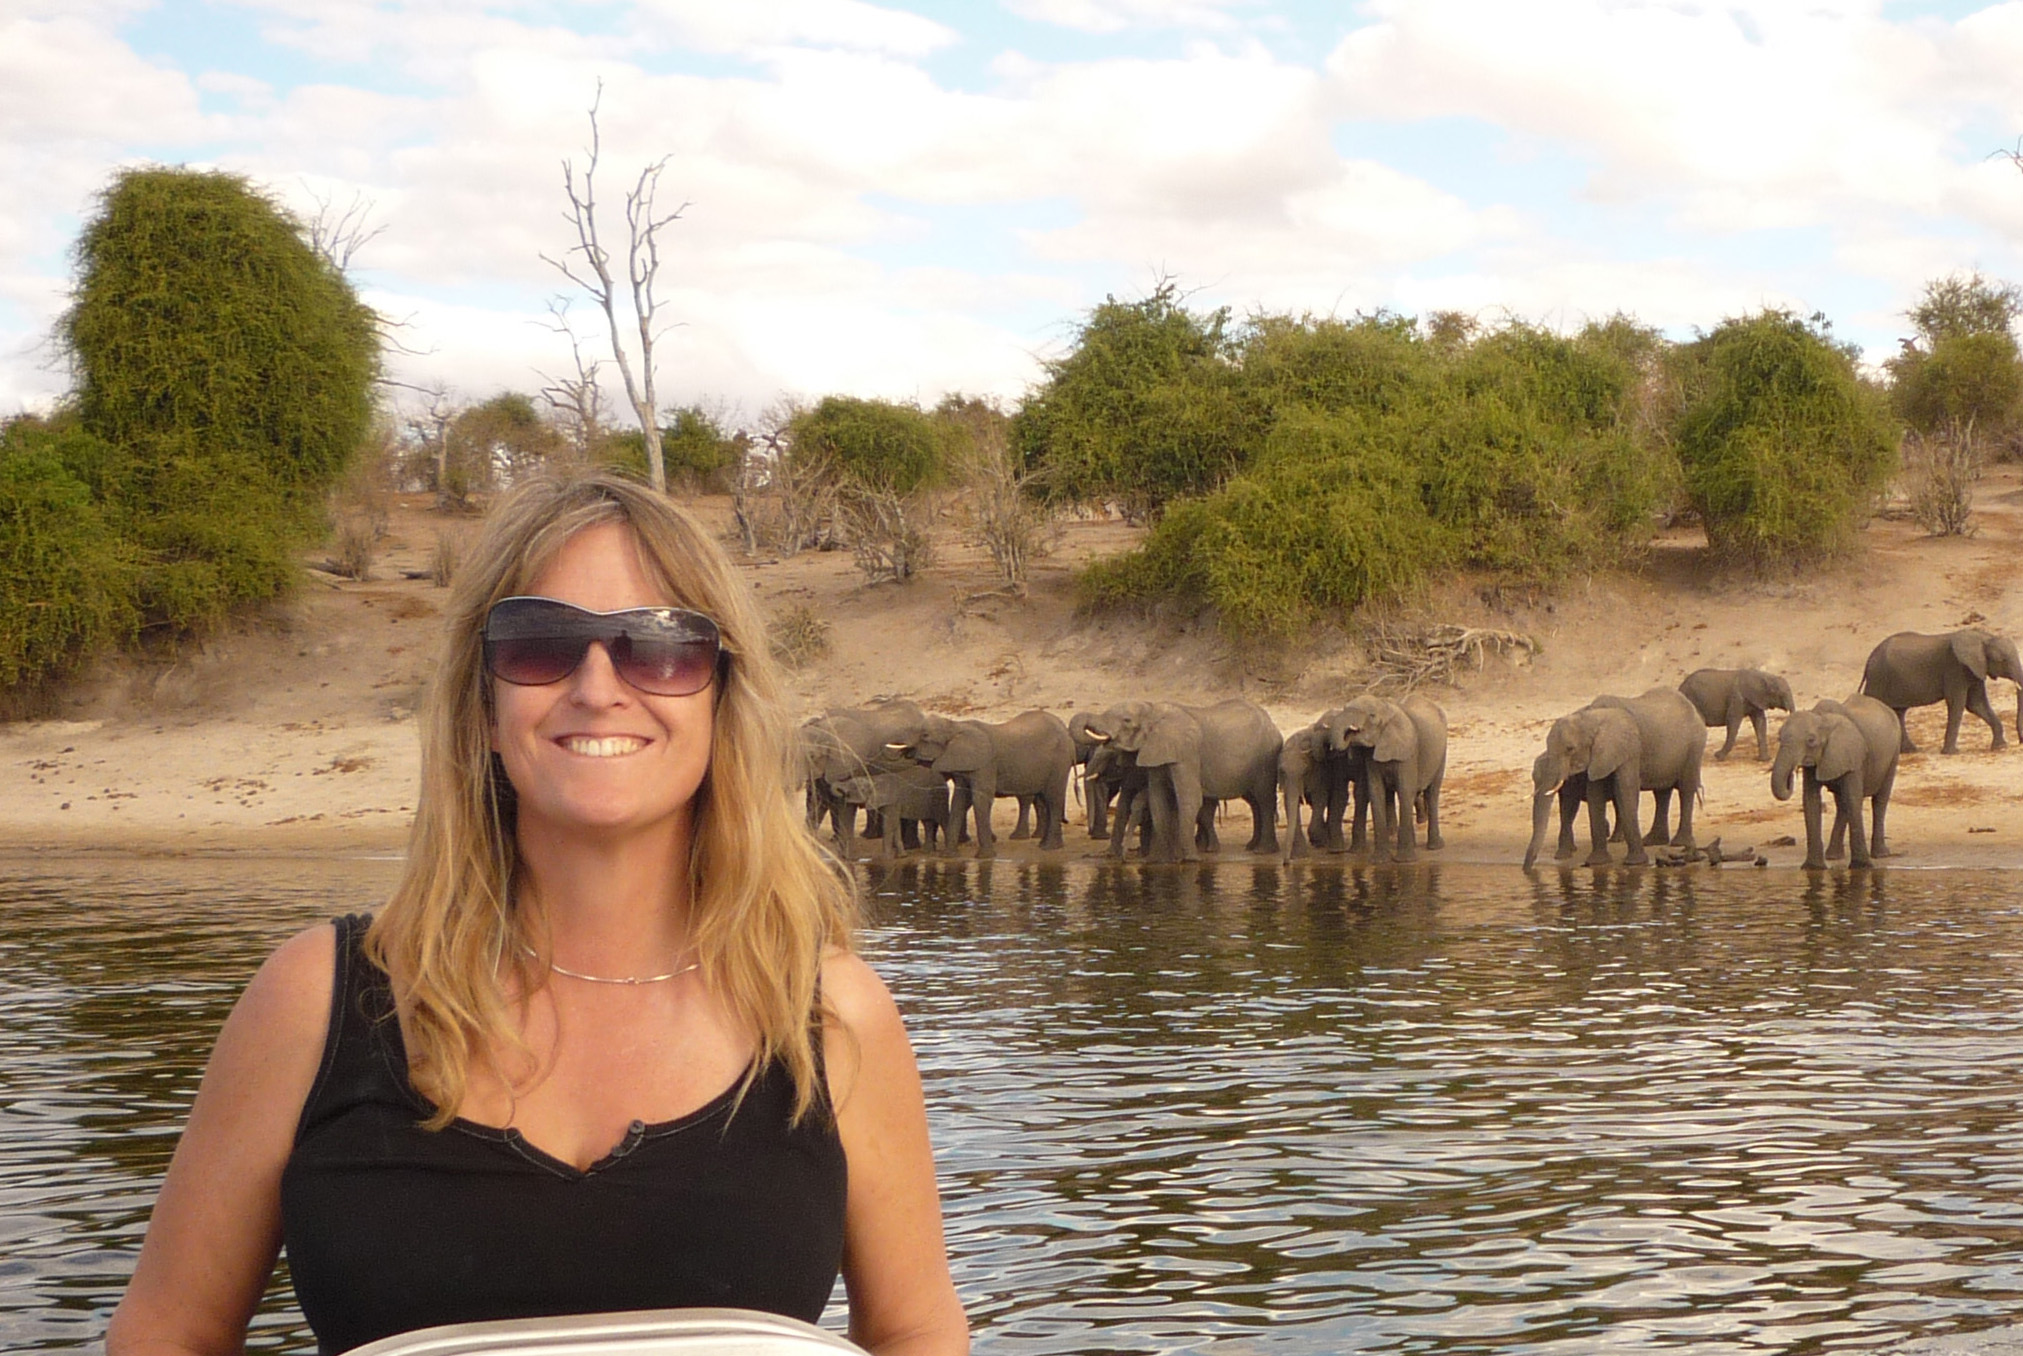 Kathleen Alexander at the helm of a small boat with elephants standing on the shore in the background